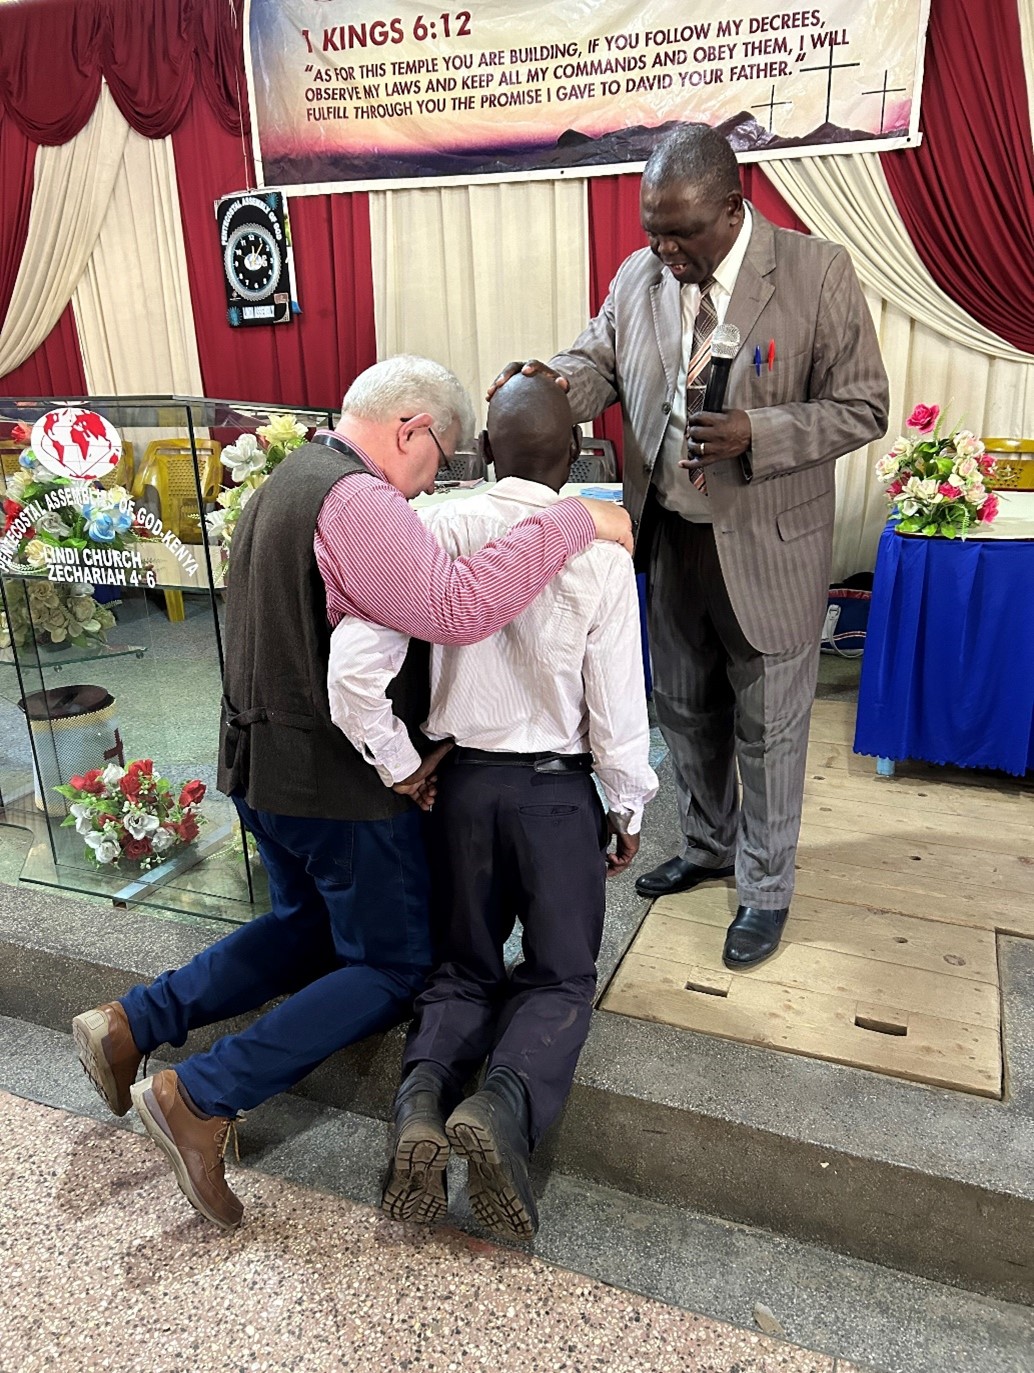 Ivan Johnston, Region 10 Director, one of the leaders of the trip, is pictured here following his preaching in Lindi Church, Nairobi, praying with someone who came forward to receive Jesus.